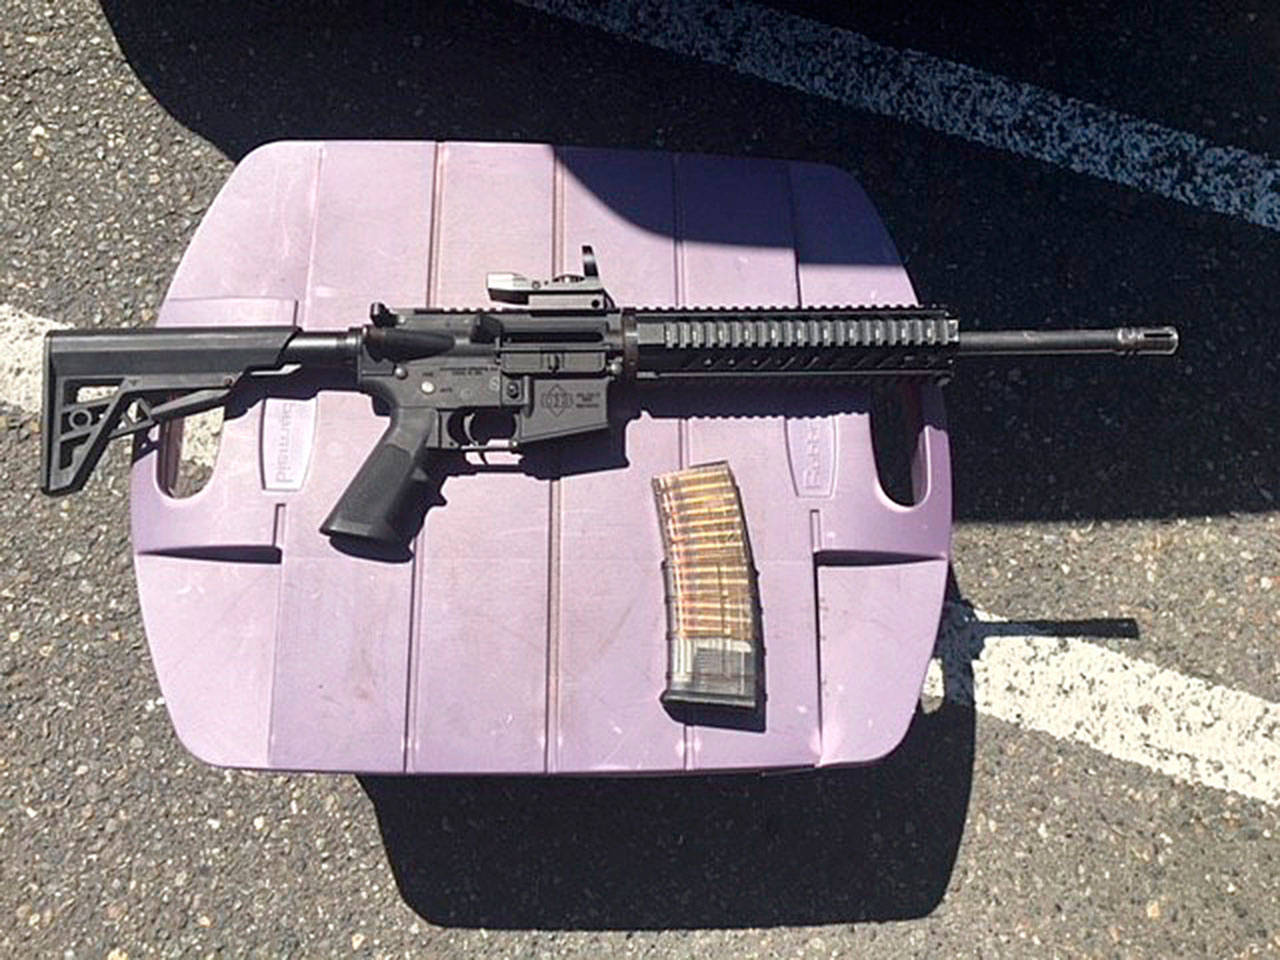 An AR-15 and a loaded magazine were recovered from a suspect in a shooting incident at the Kent Station parking garage in 2019. (King County Sheriff’s Office)